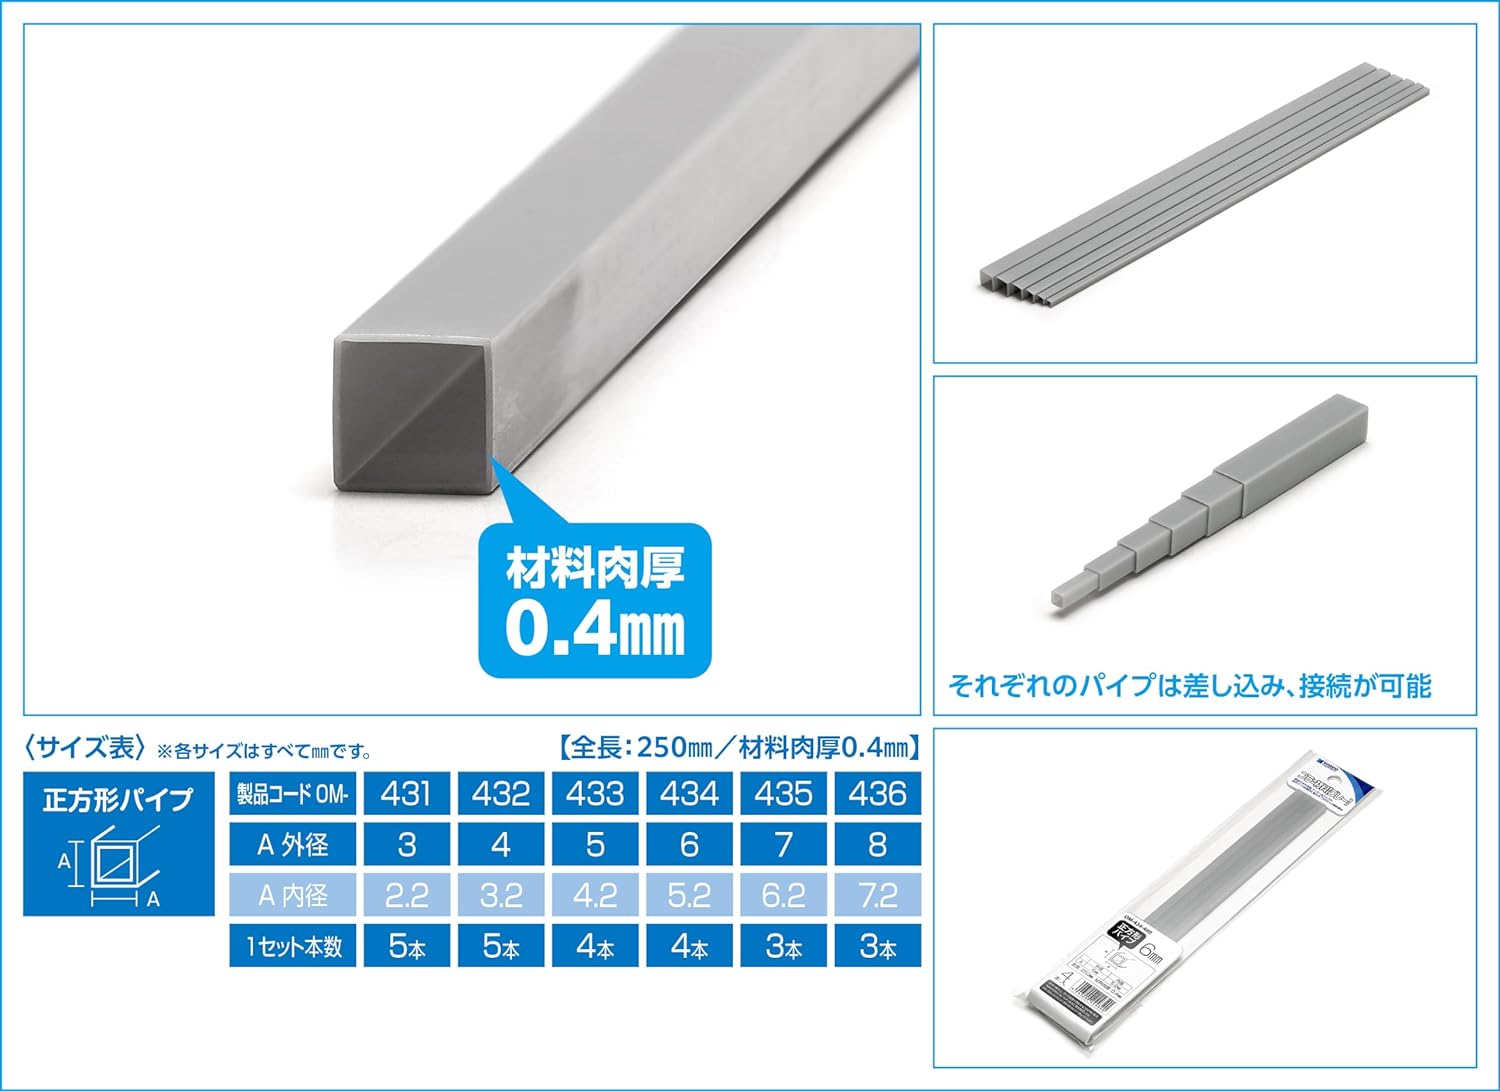 Wave OM-433 Plastic Material Gray Square Pipe 0.2 inch (5 mm) 4 Pcs Material Series - BanzaiHobby